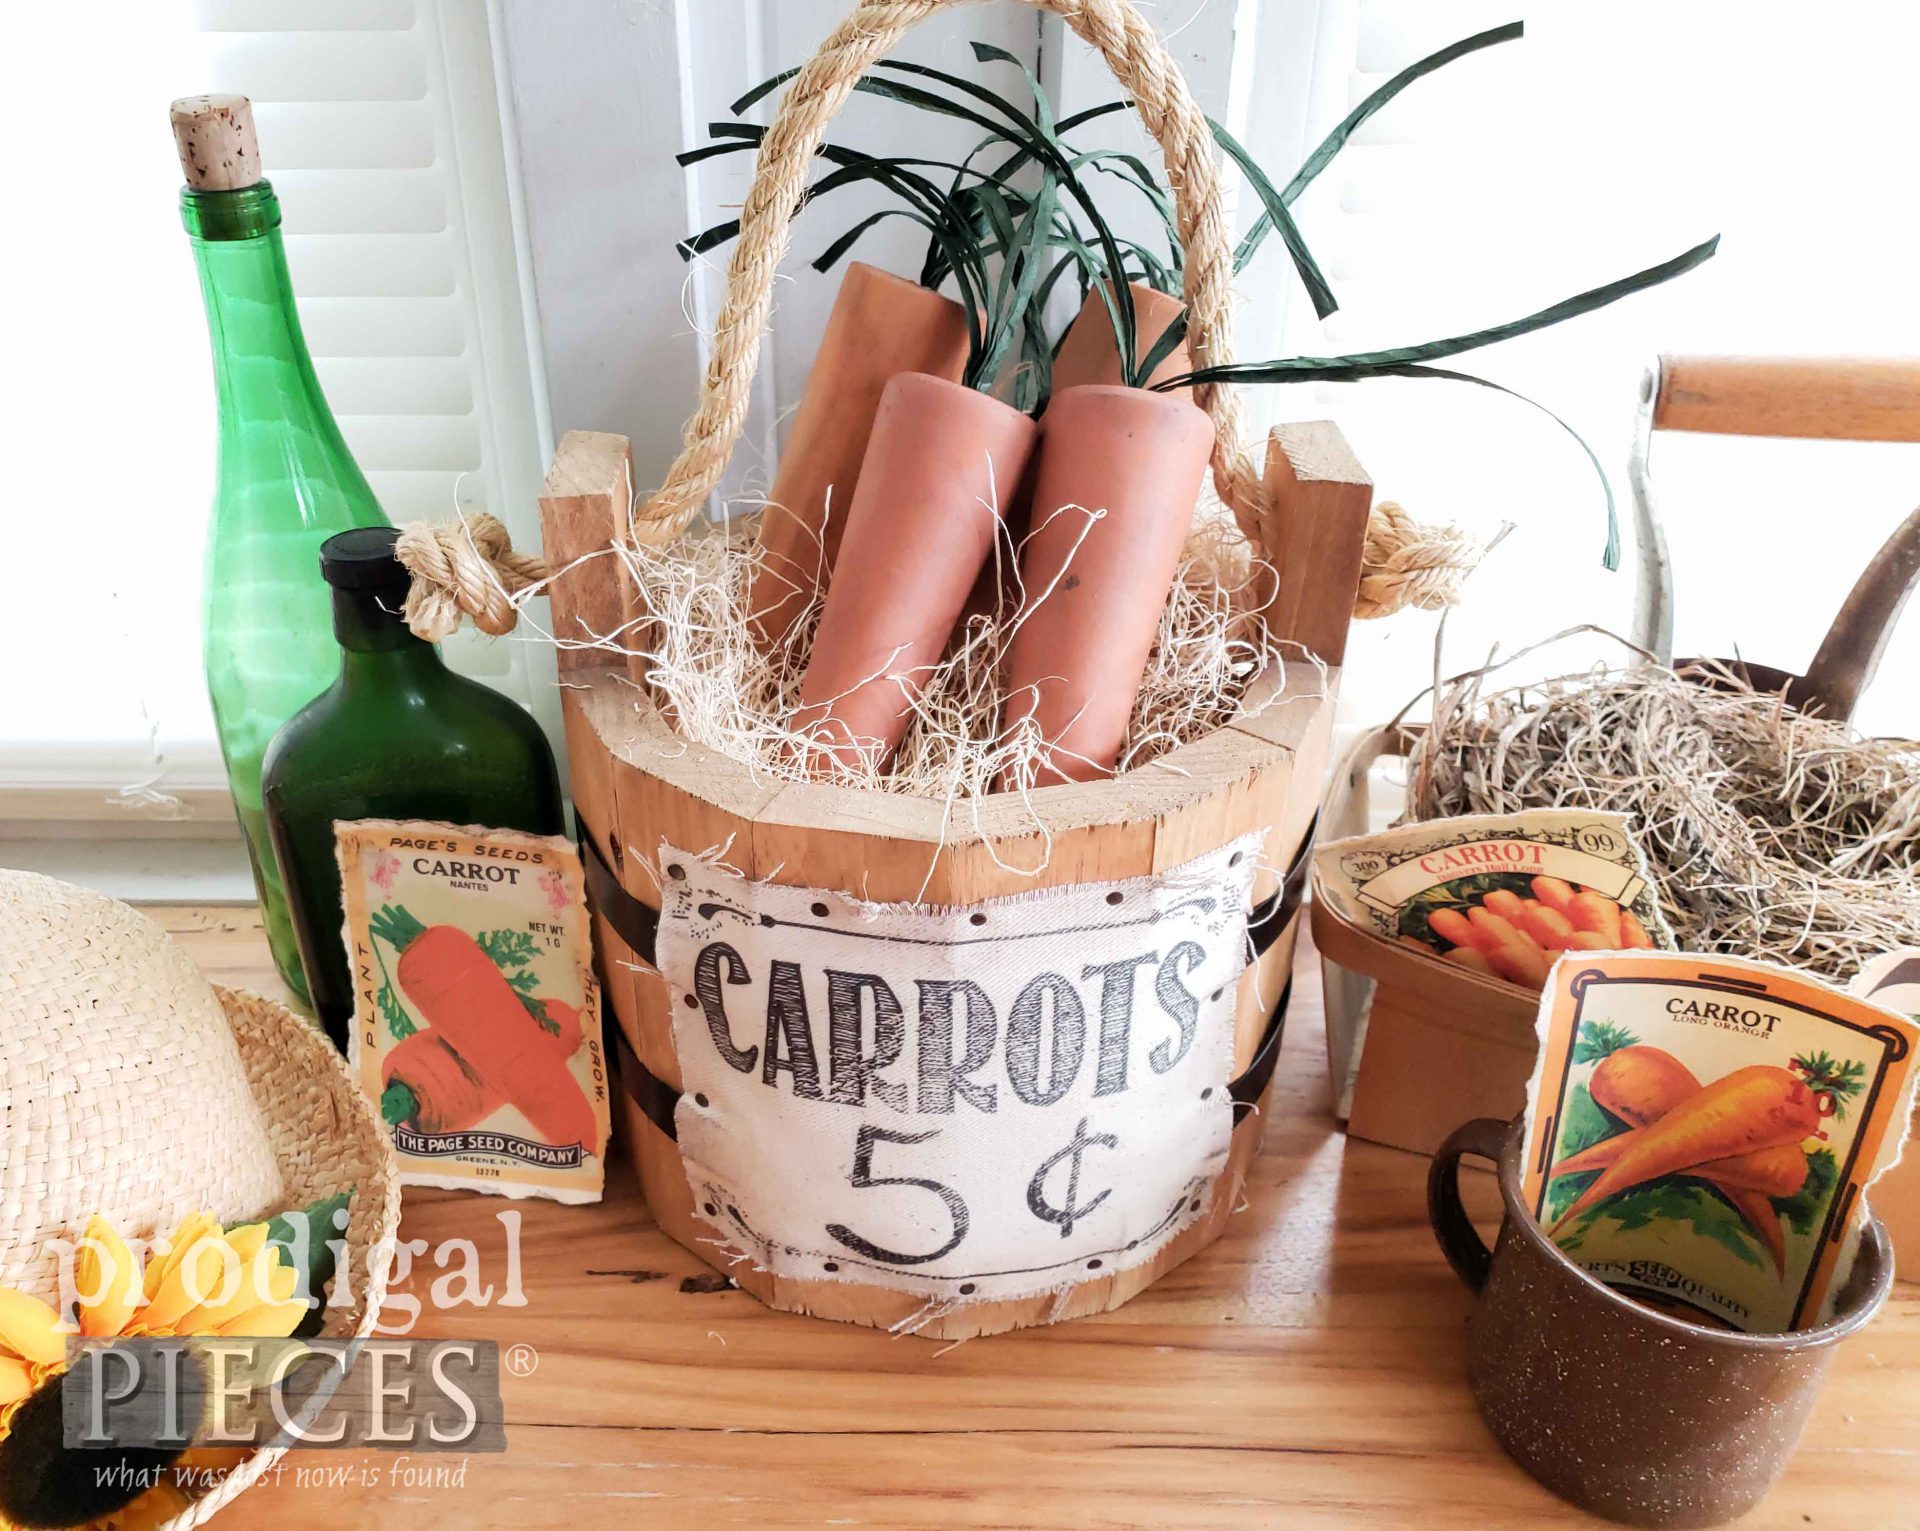 DIY Spring Decor with Upcycled Carrots by Larissa of Prodigal Pieces | prodigalpieces.com #prodigalpieces #diy #crafts #spring #home #homedecor #farmhouse